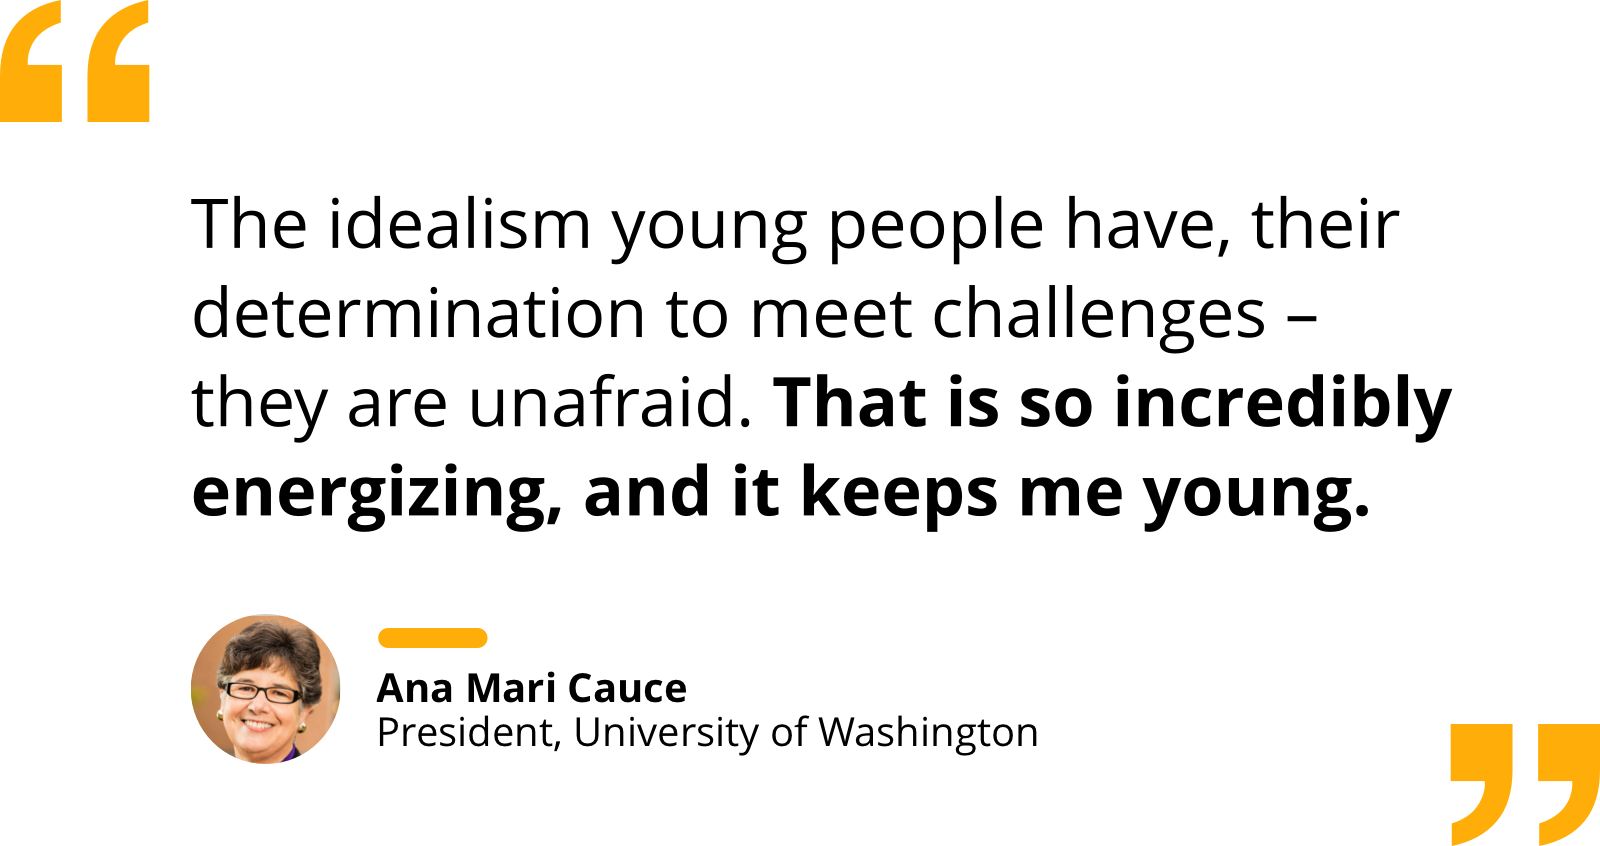 Quote by Ana Mari Cauce re: the vicarious energy of young people's idealism and determination.